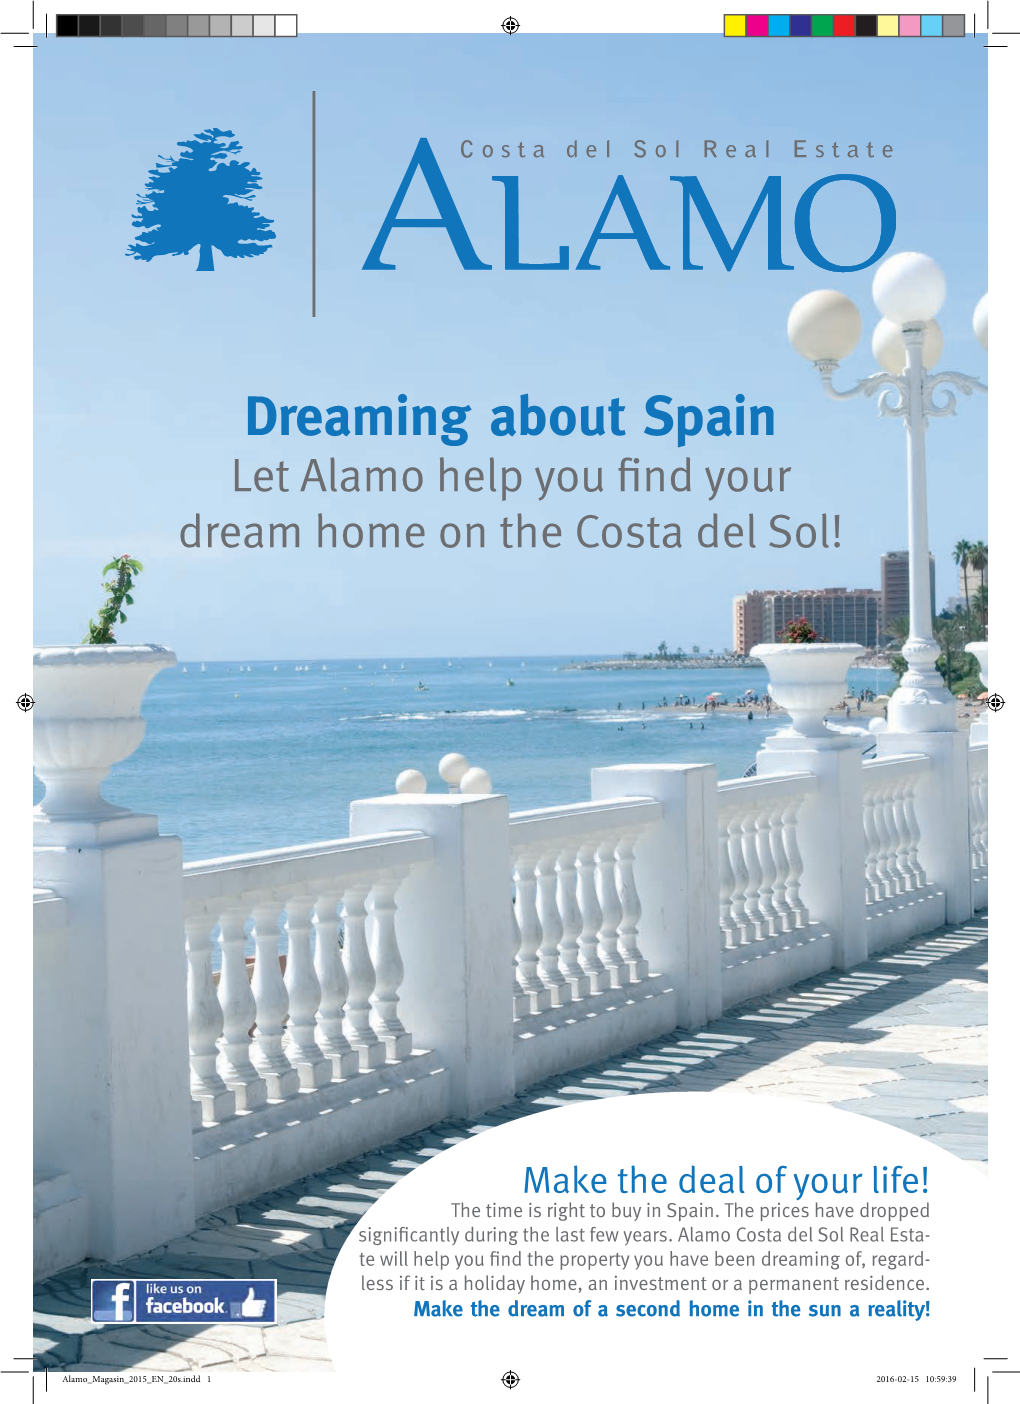 Dreaming About Spain Let Alamo Help You Find Your Dream Home on the Costa Del Sol!